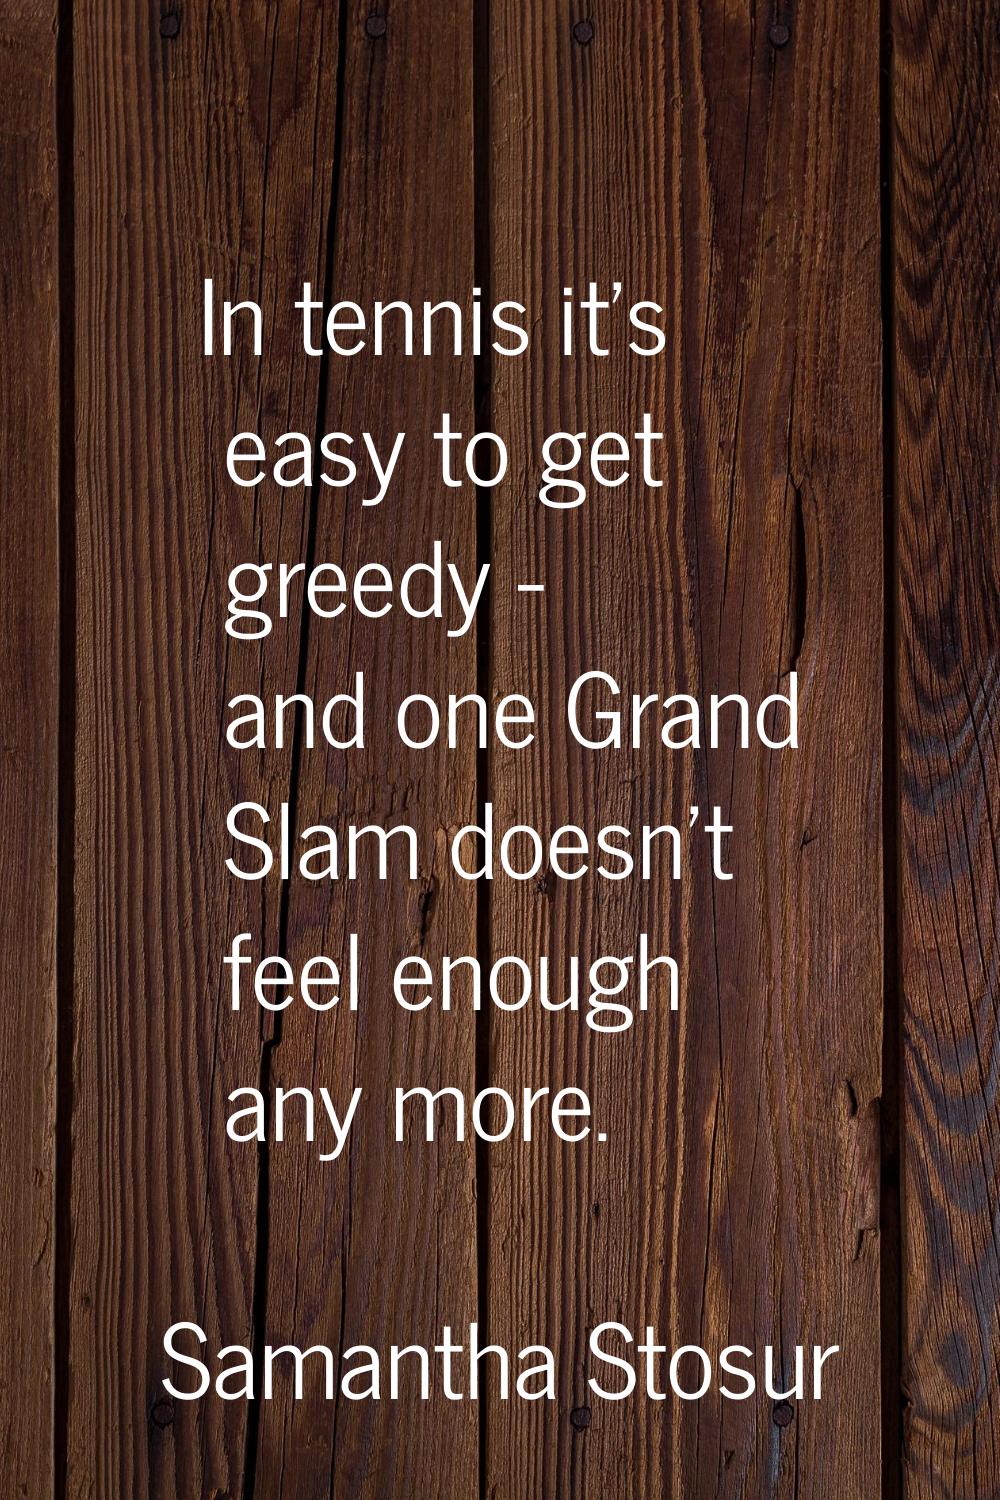 In tennis it's easy to get greedy - and one Grand Slam doesn't feel enough any more.